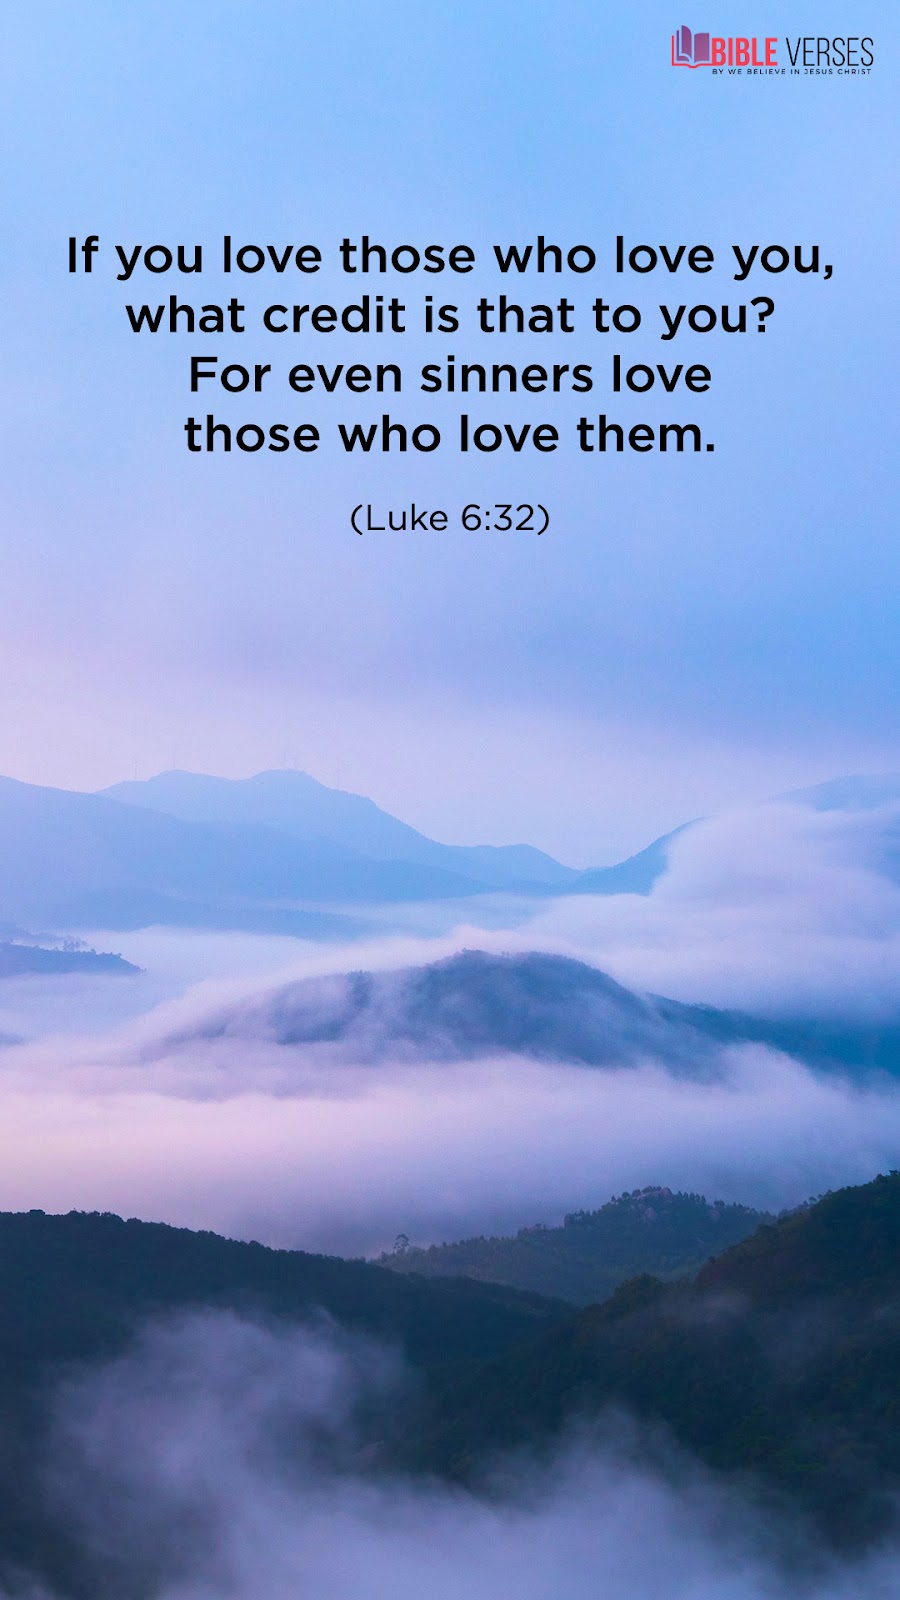 Bible Verses of the Day Images